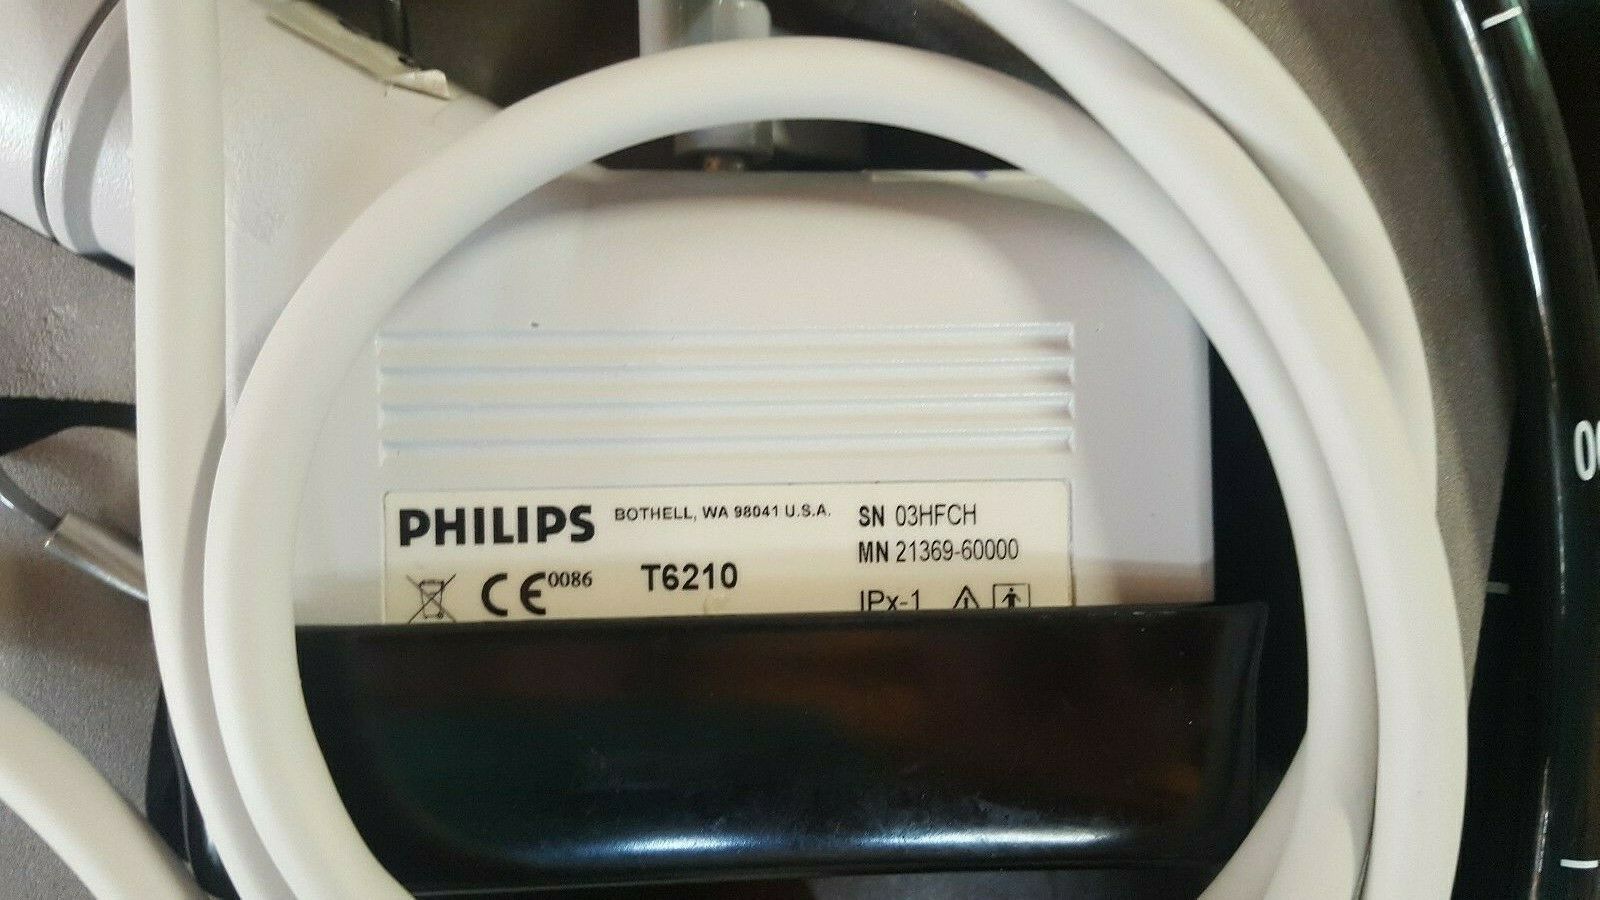 HP Philips T6210 21369A TEE Ultrasound Probe Transducer DIAGNOSTIC ULTRASOUND MACHINES FOR SALE